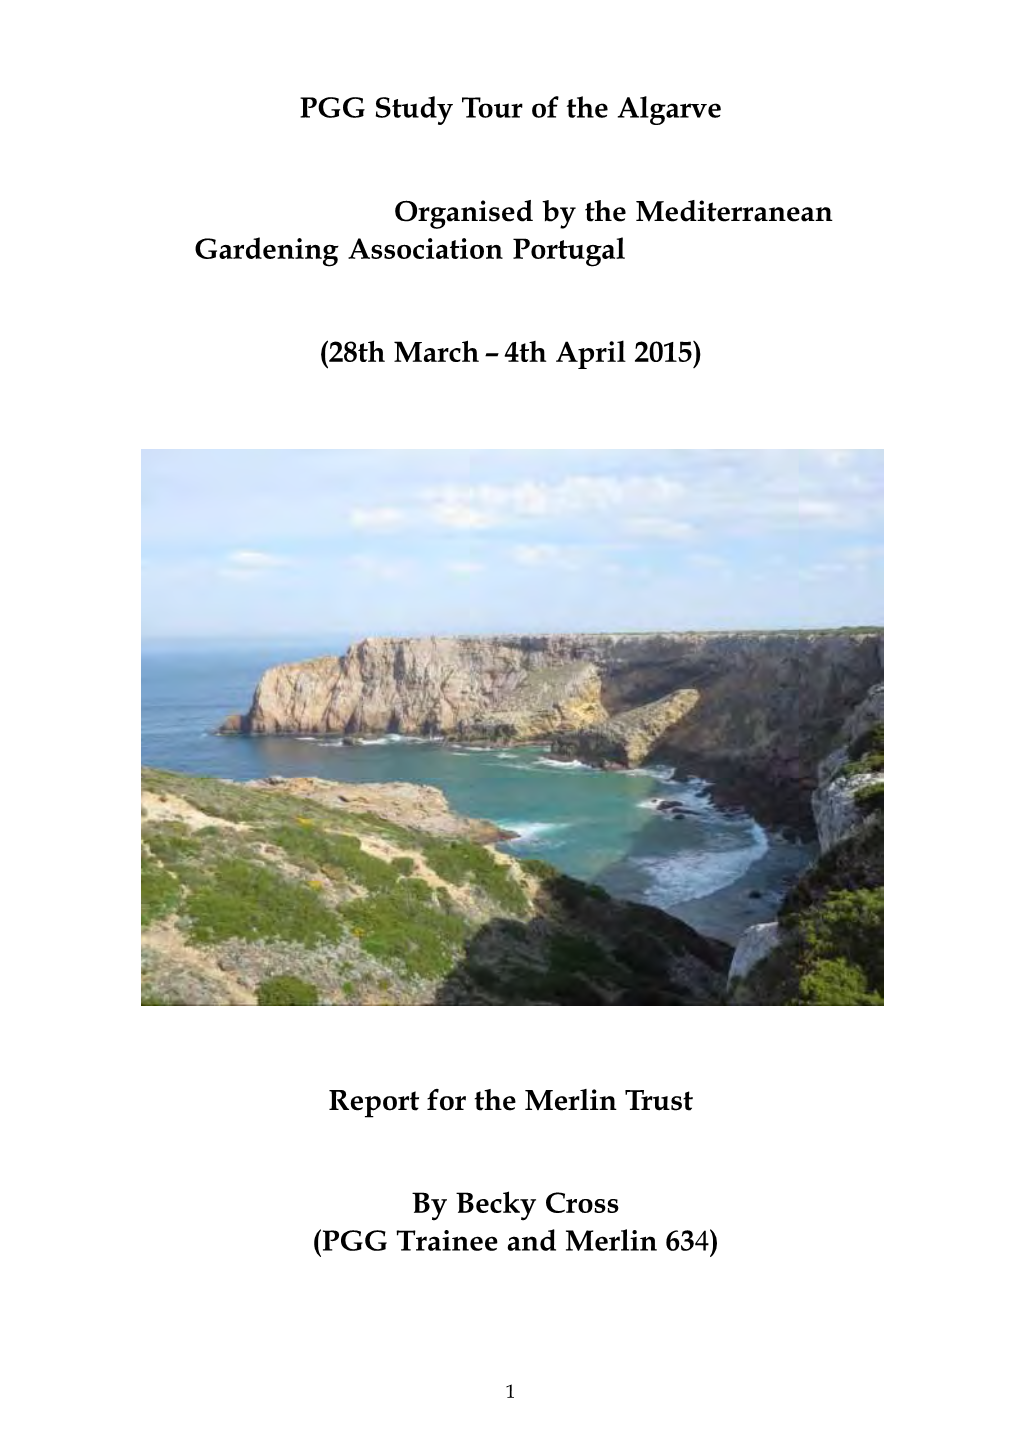 PGG Study Tour of the Algarve Organised by the Mediterranean Gardening Association Portugal